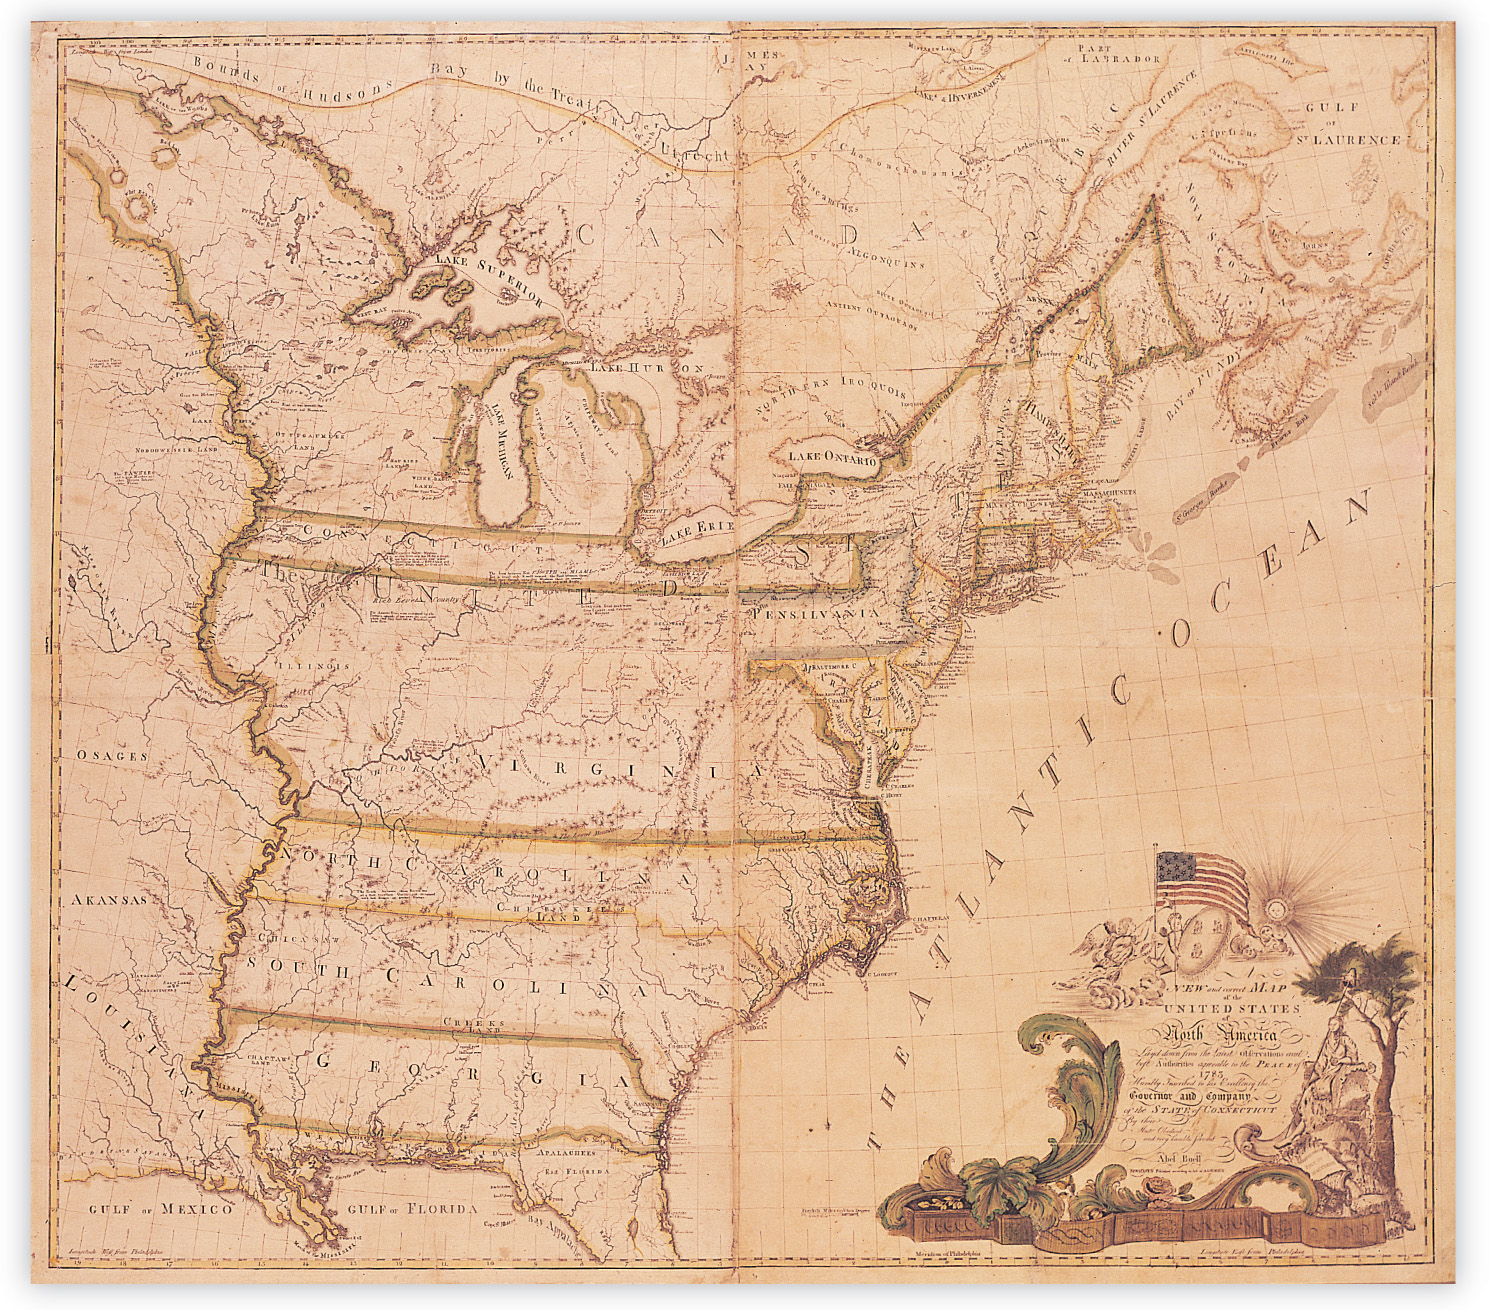 An early map of the U.S.